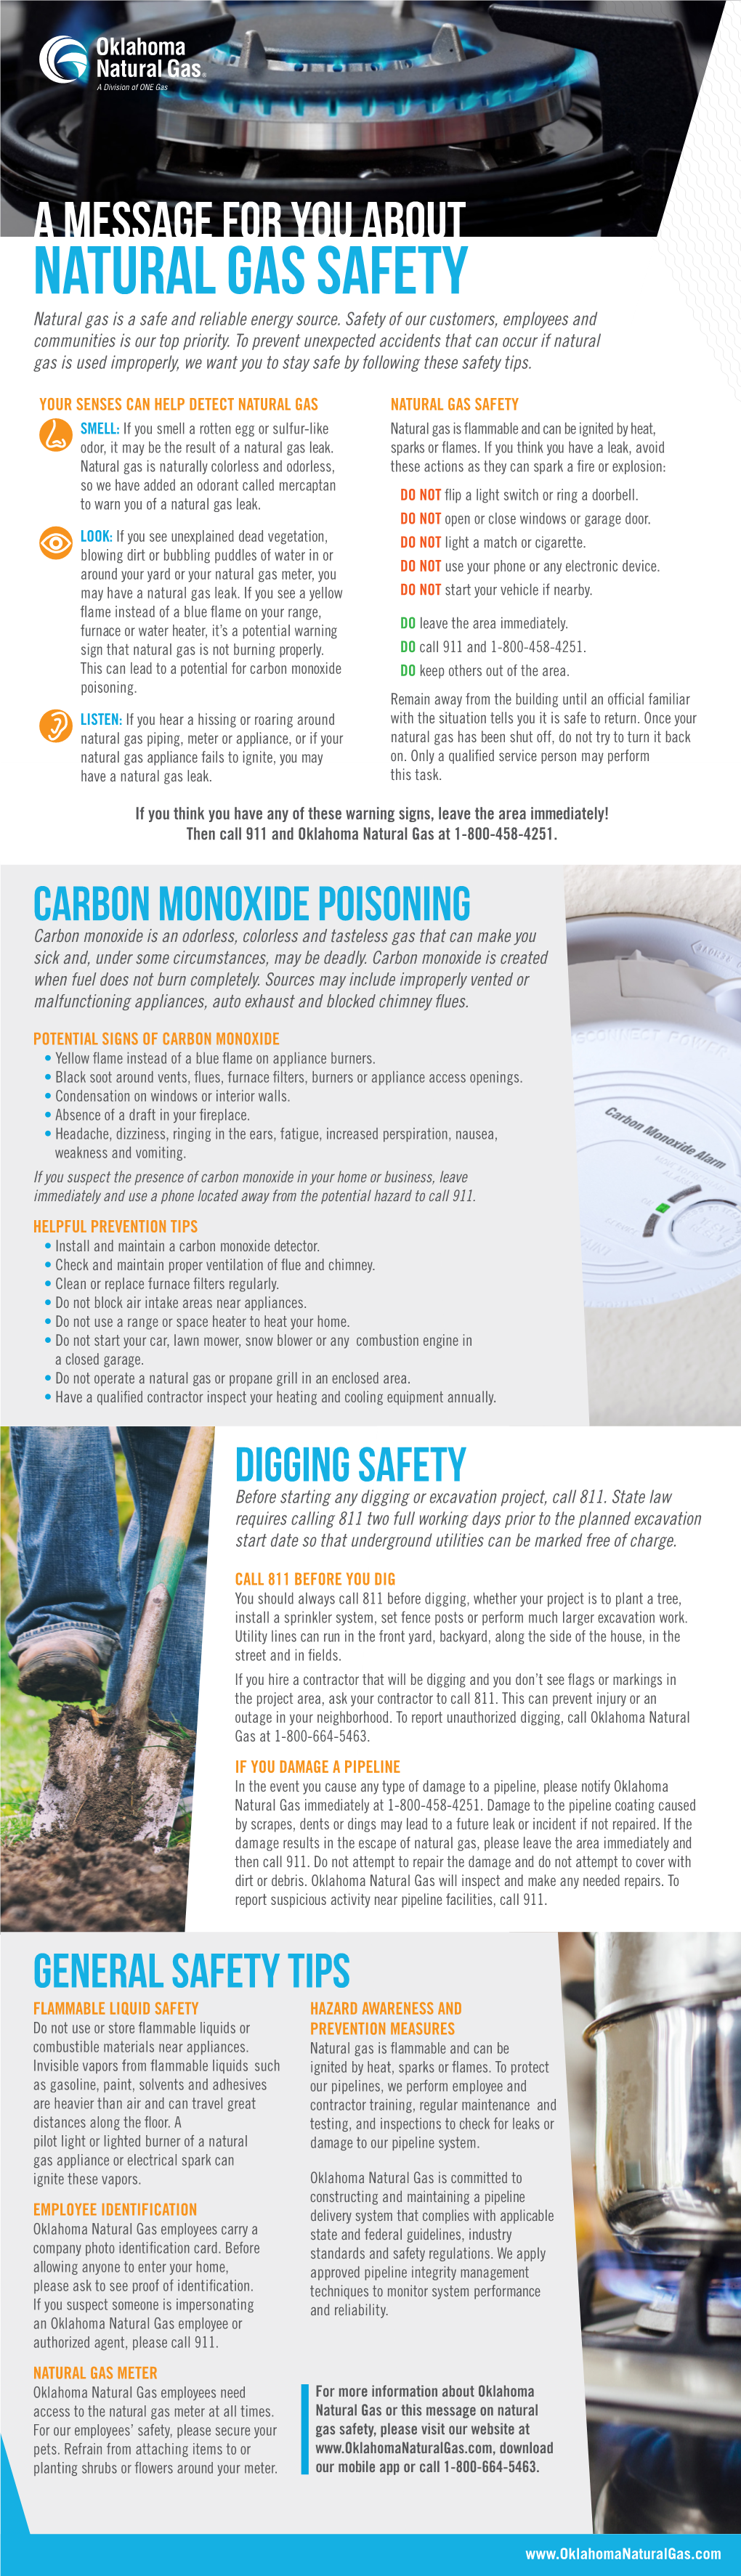 Natural Gas Safety Natural Gas Is a Safe and Reliable Energy Source